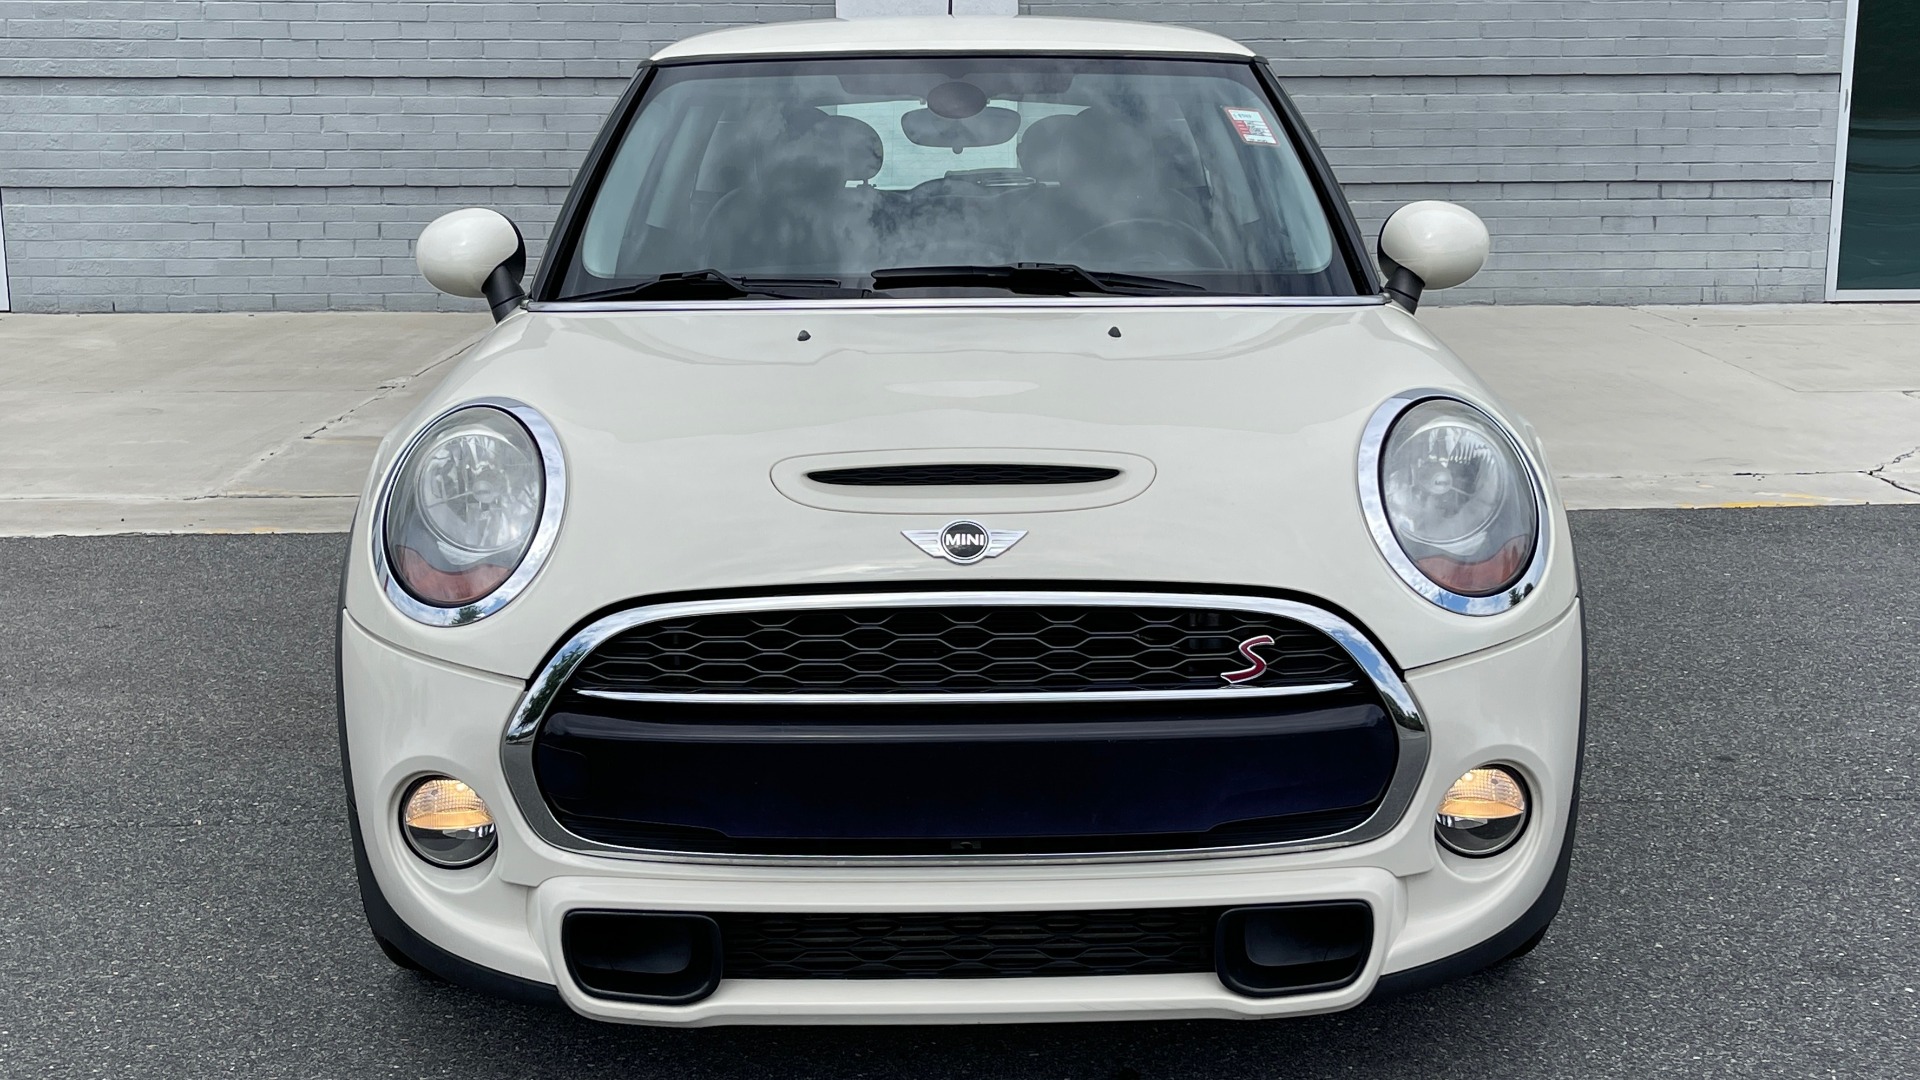 Used 2015 MINI COOPER HARDTOP S 2DR / 2.0L TURBO / FWD / 6-SPD MANUAL for sale Sold at Formula Imports in Charlotte NC 28227 10